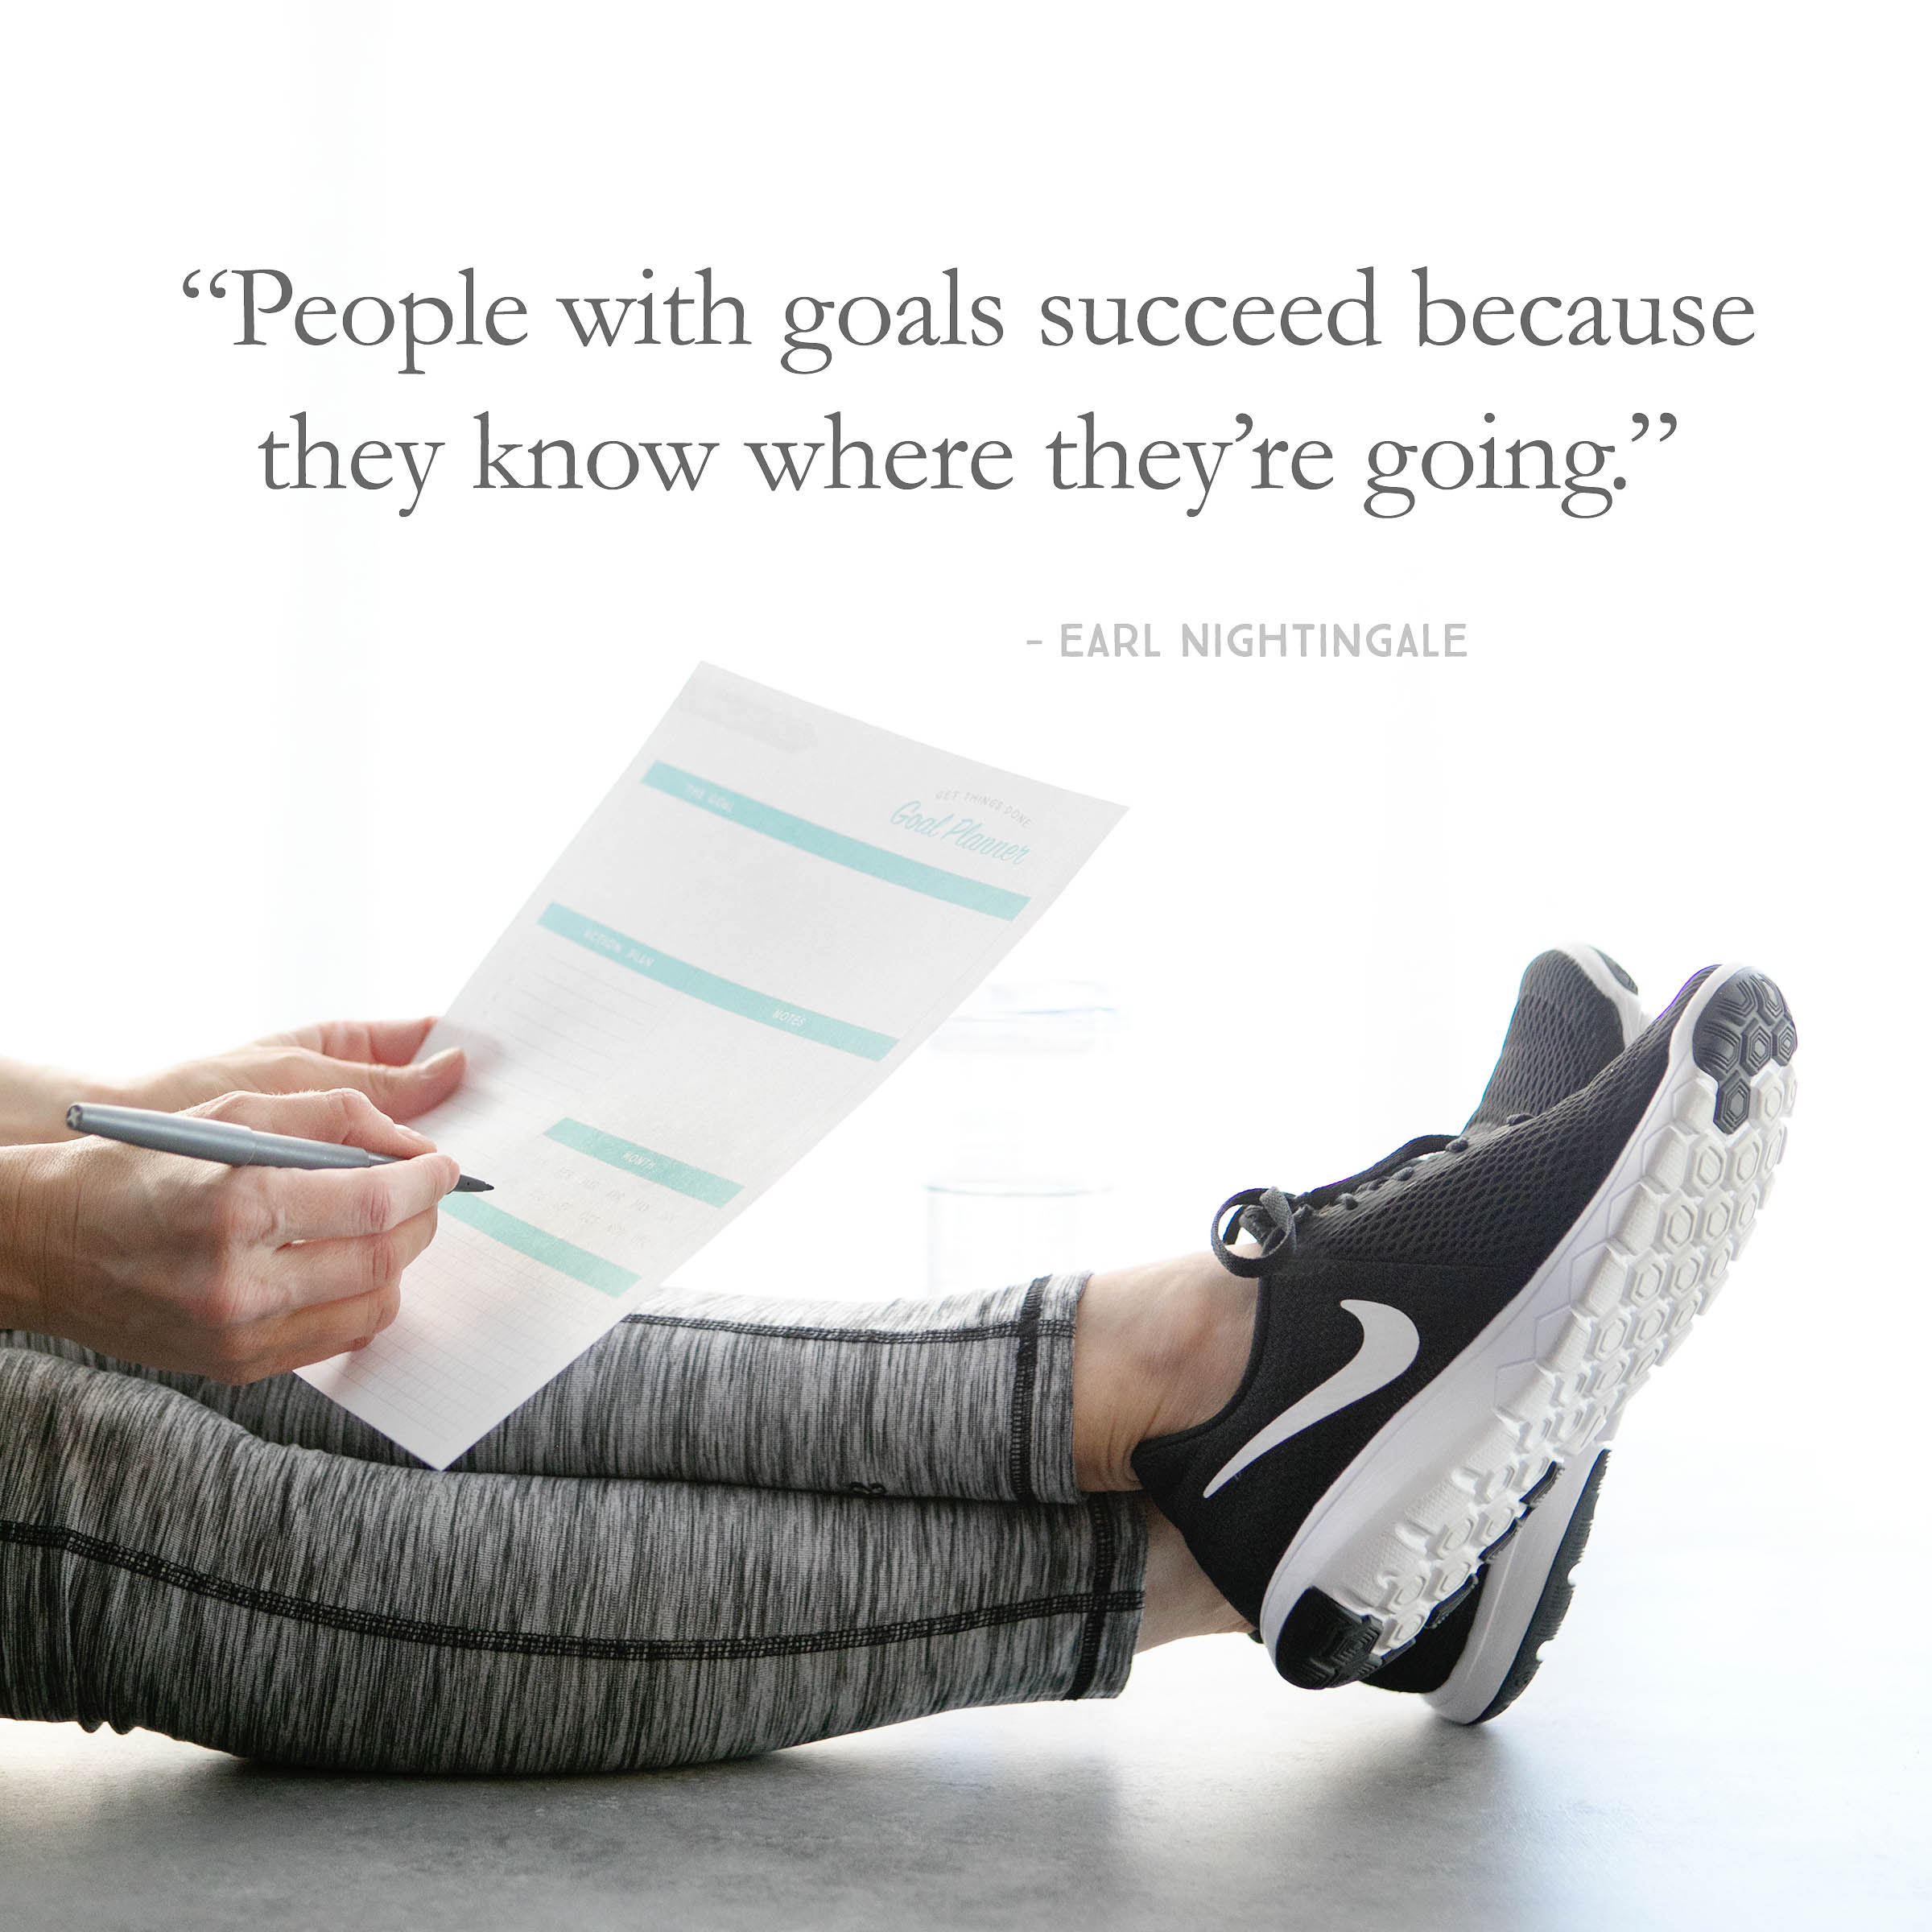 Get ready to crush your goals with this powerful goal planner! It's functional, concise and printer friendly. This is a tool that will help you move from setting goals to achieving them.